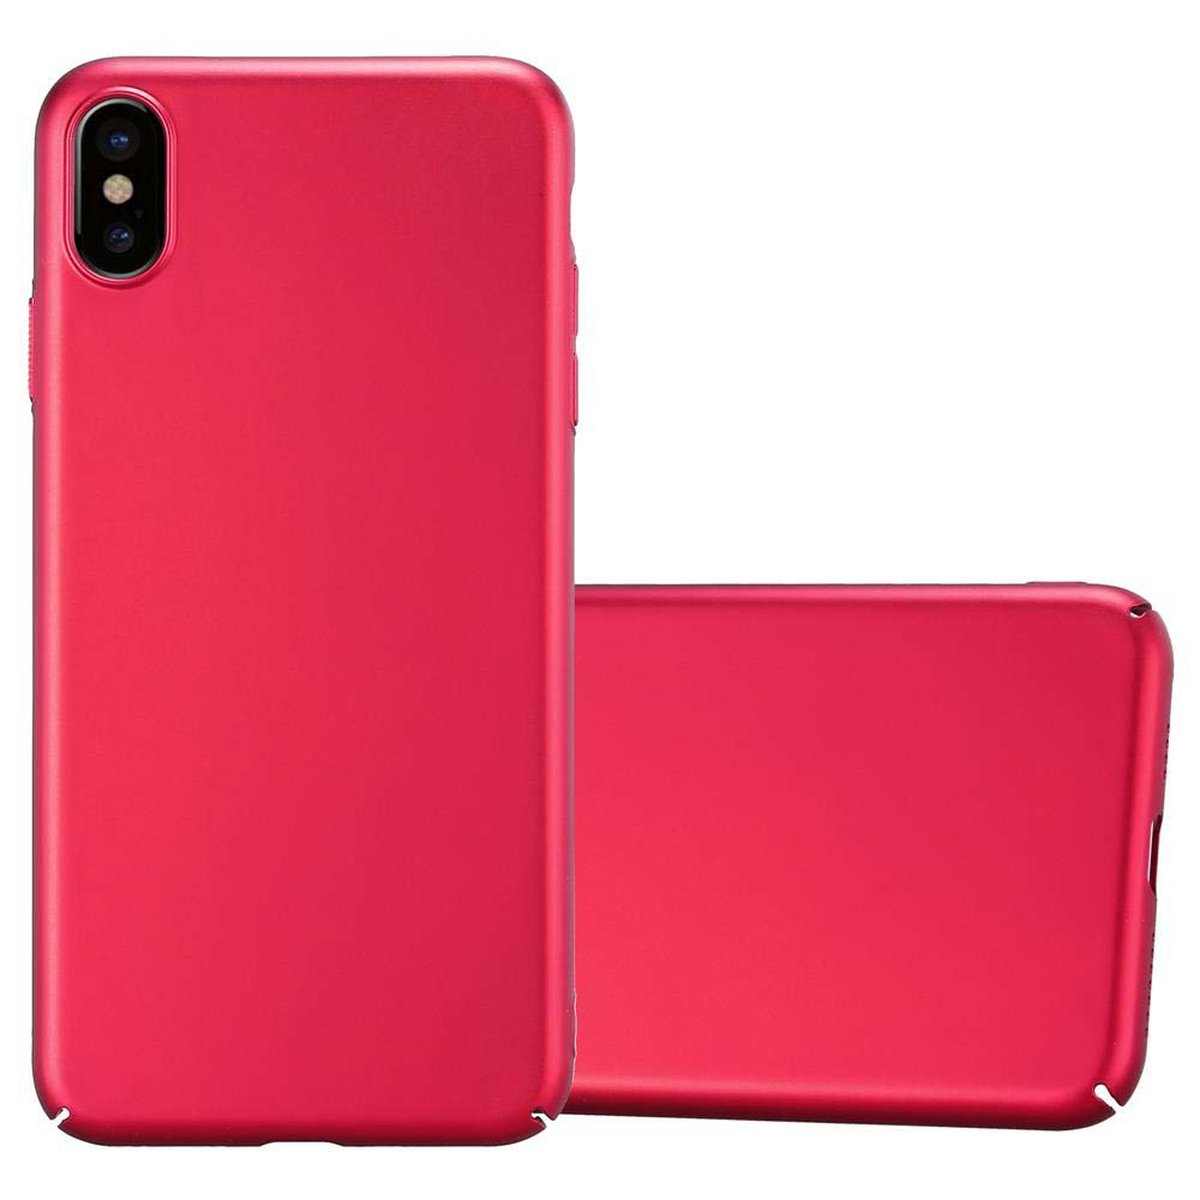 Case Metall iPhone Hülle METALL Style, CADORABO ROT Hard Apple, Matt XS MAX, im Backcover,